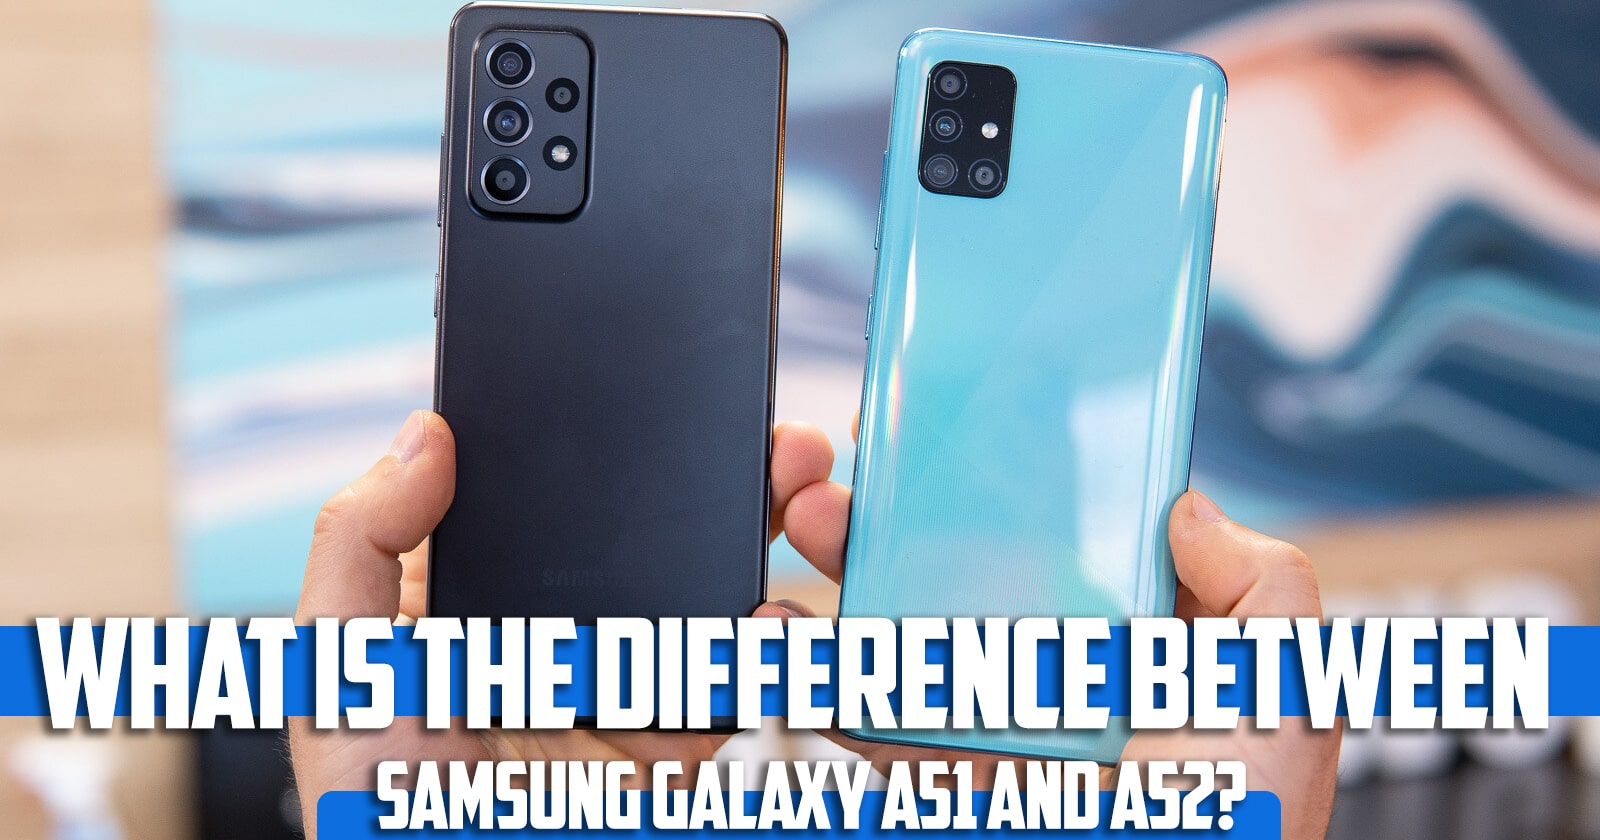 What is the difference between Samsung Galaxy a51 and a52?